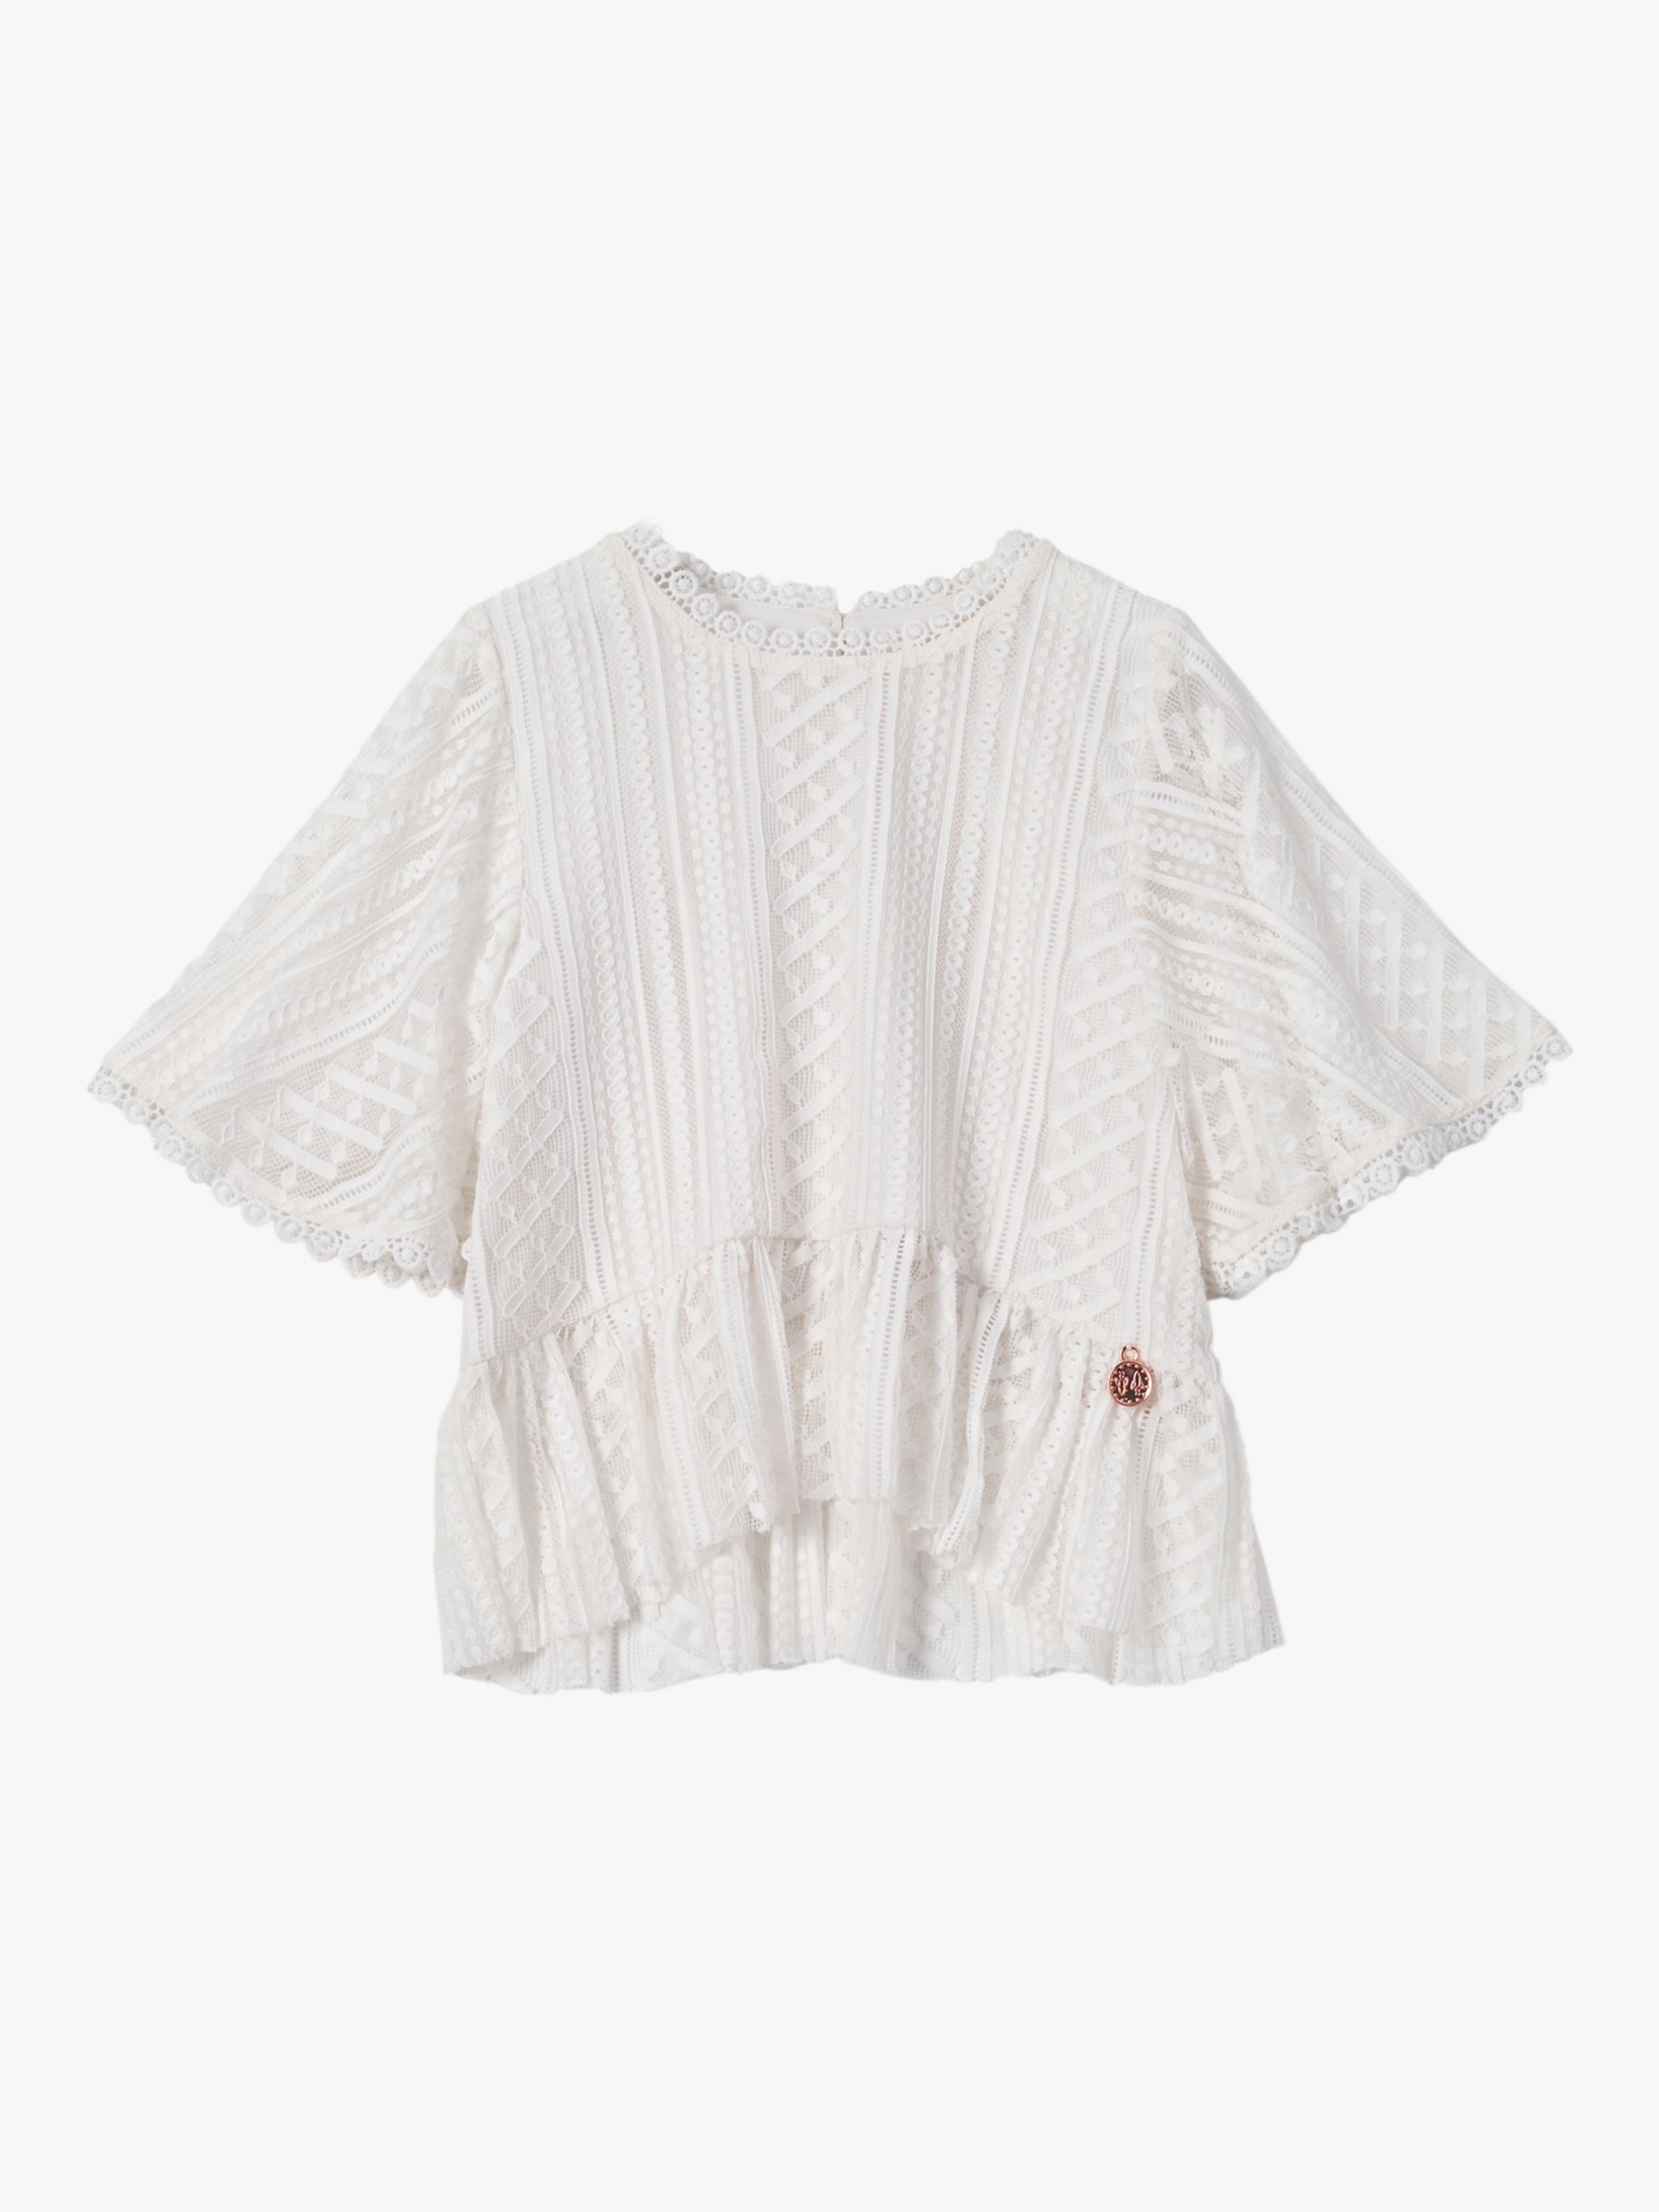 Angel & Rocket Kids' Cape Lace Top, Ivory, 3 years